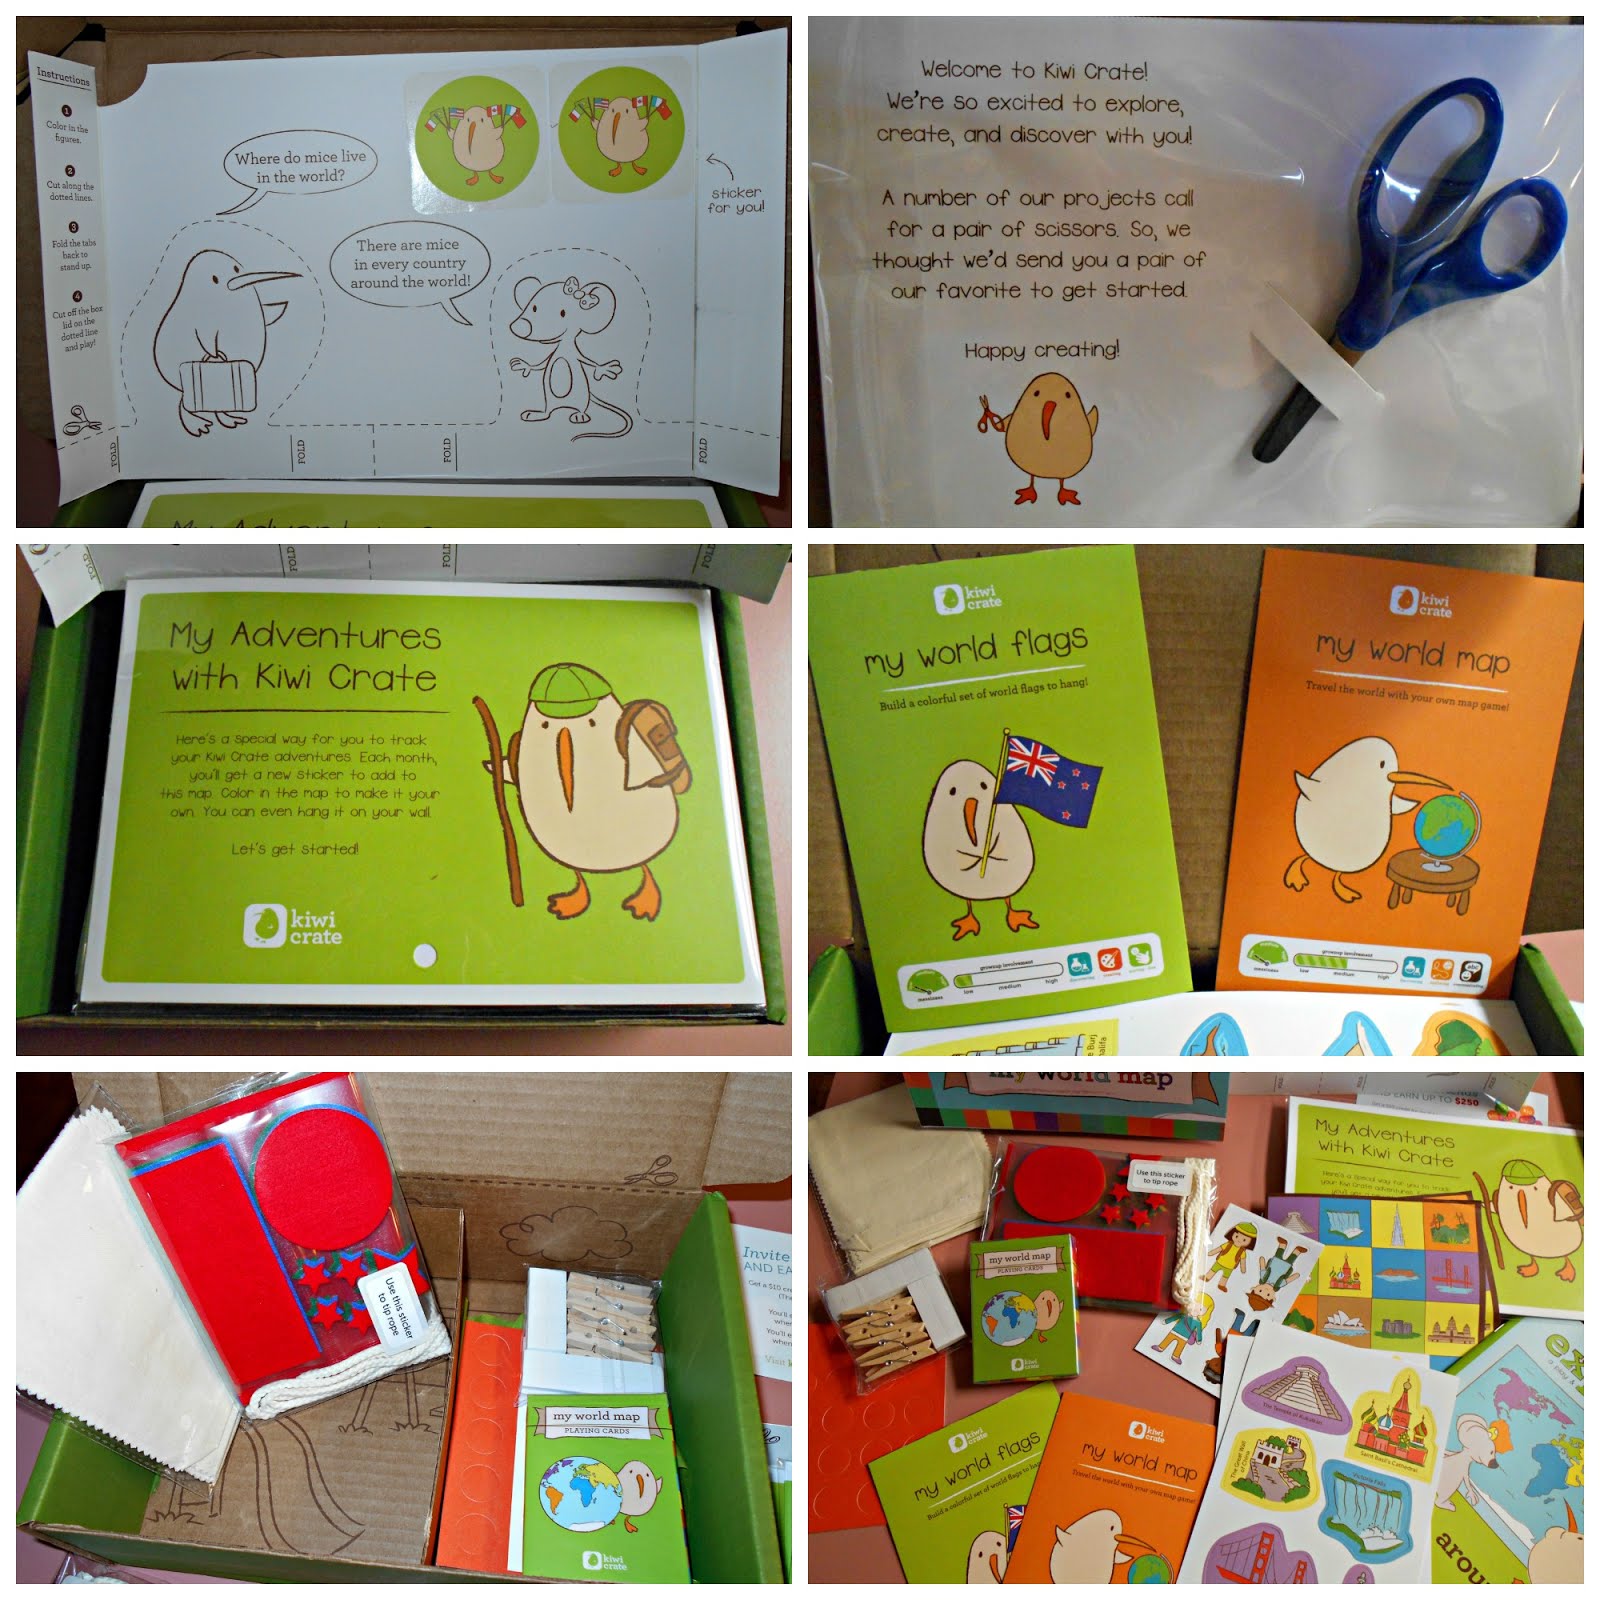 Build Creativity & Curiosity With Kiwi Crate - Product Review